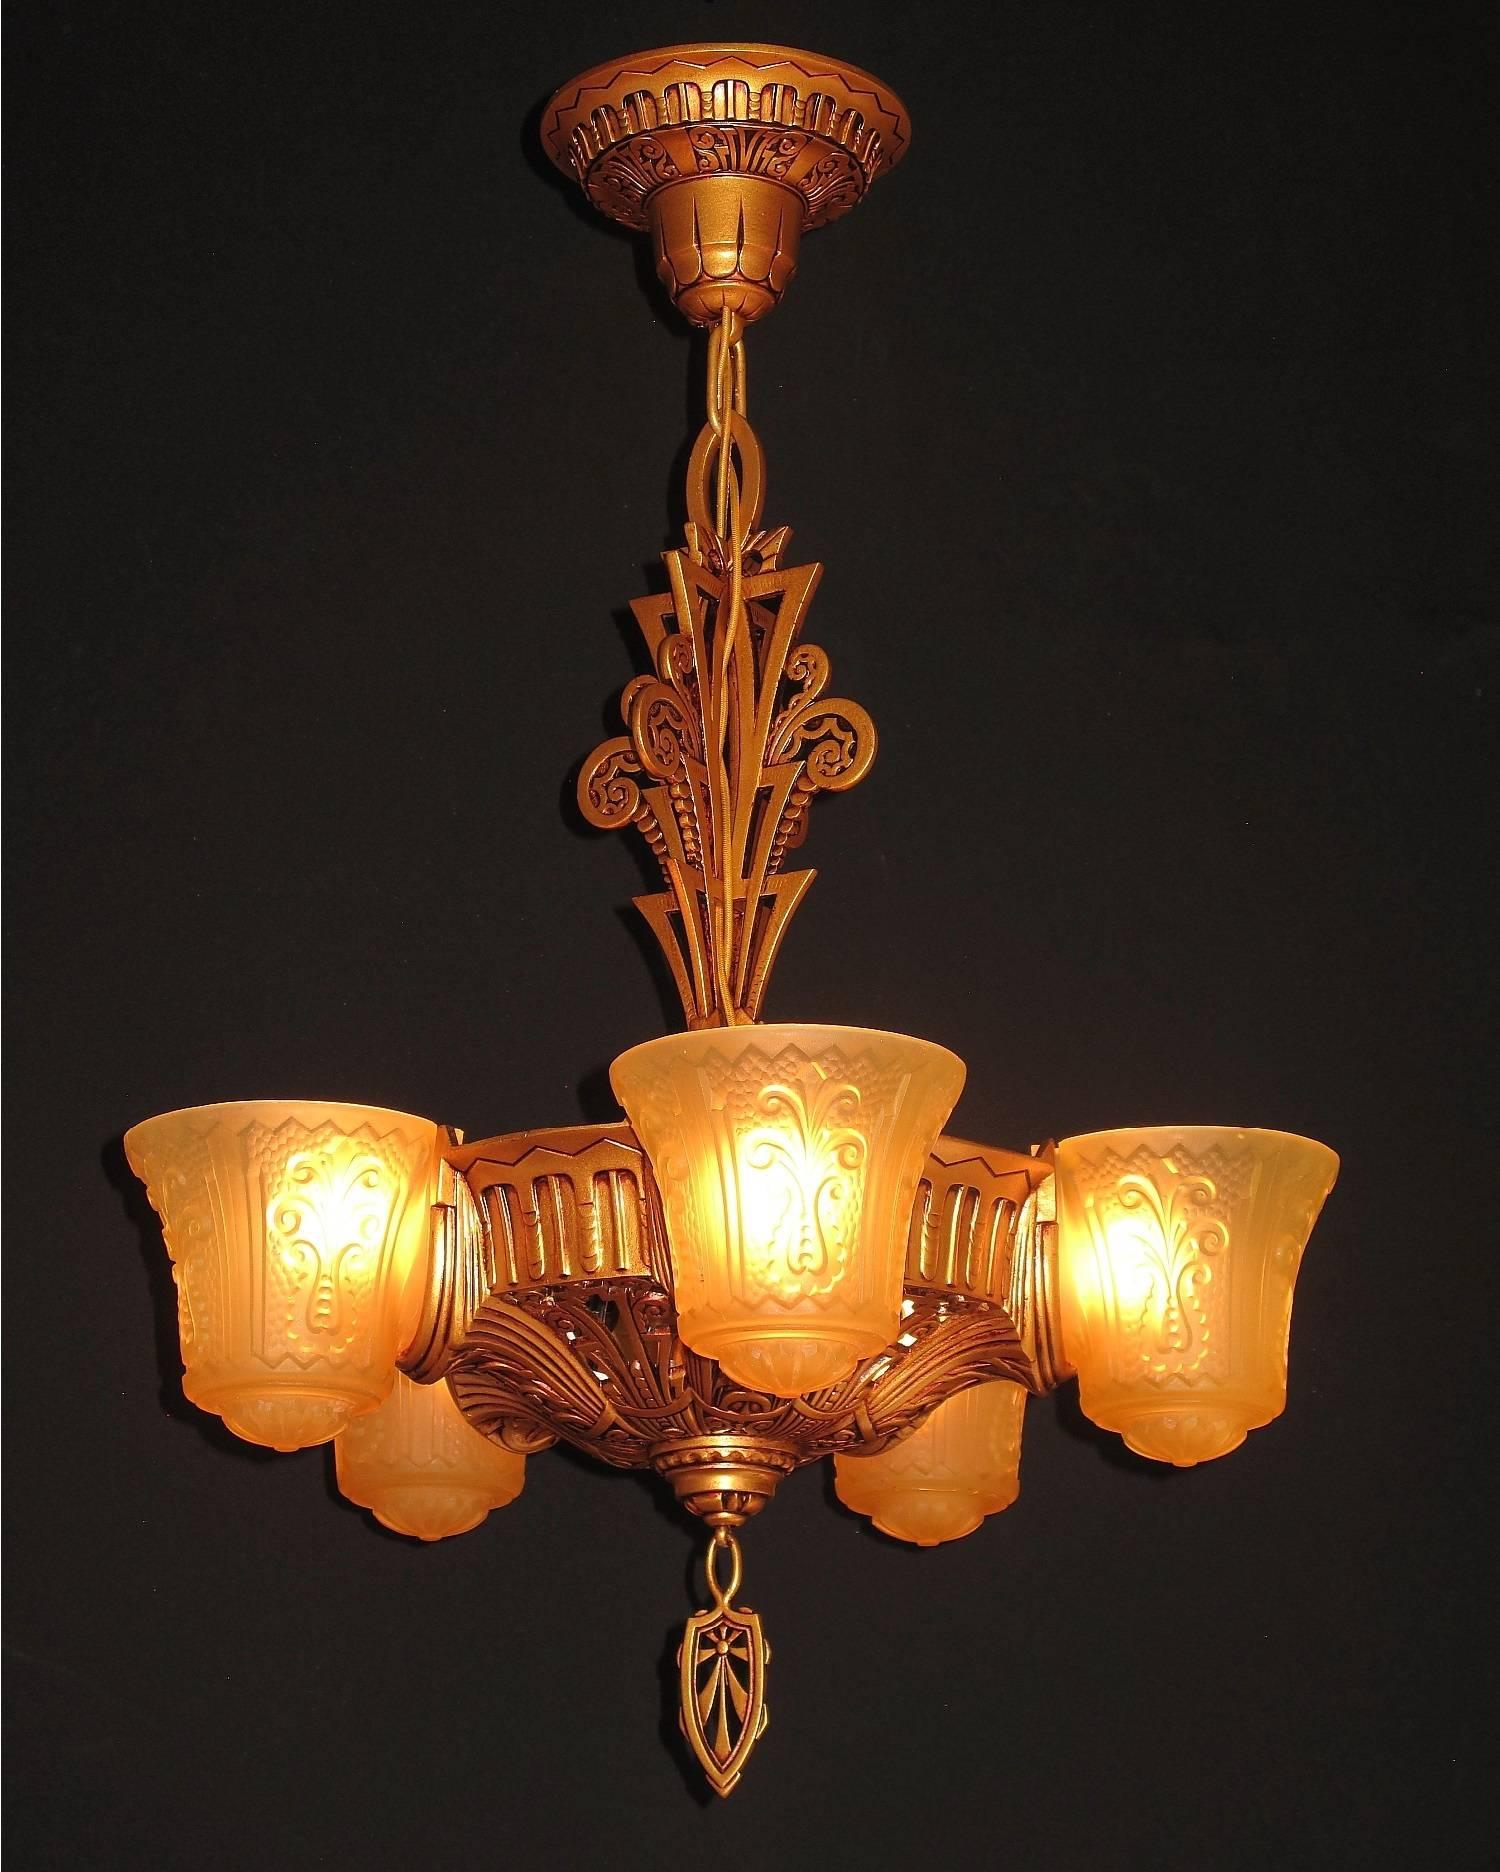 Pair of Beardslee Art Deco Slip Shade Sconces Warm Golden with Amber Shades For Sale 2